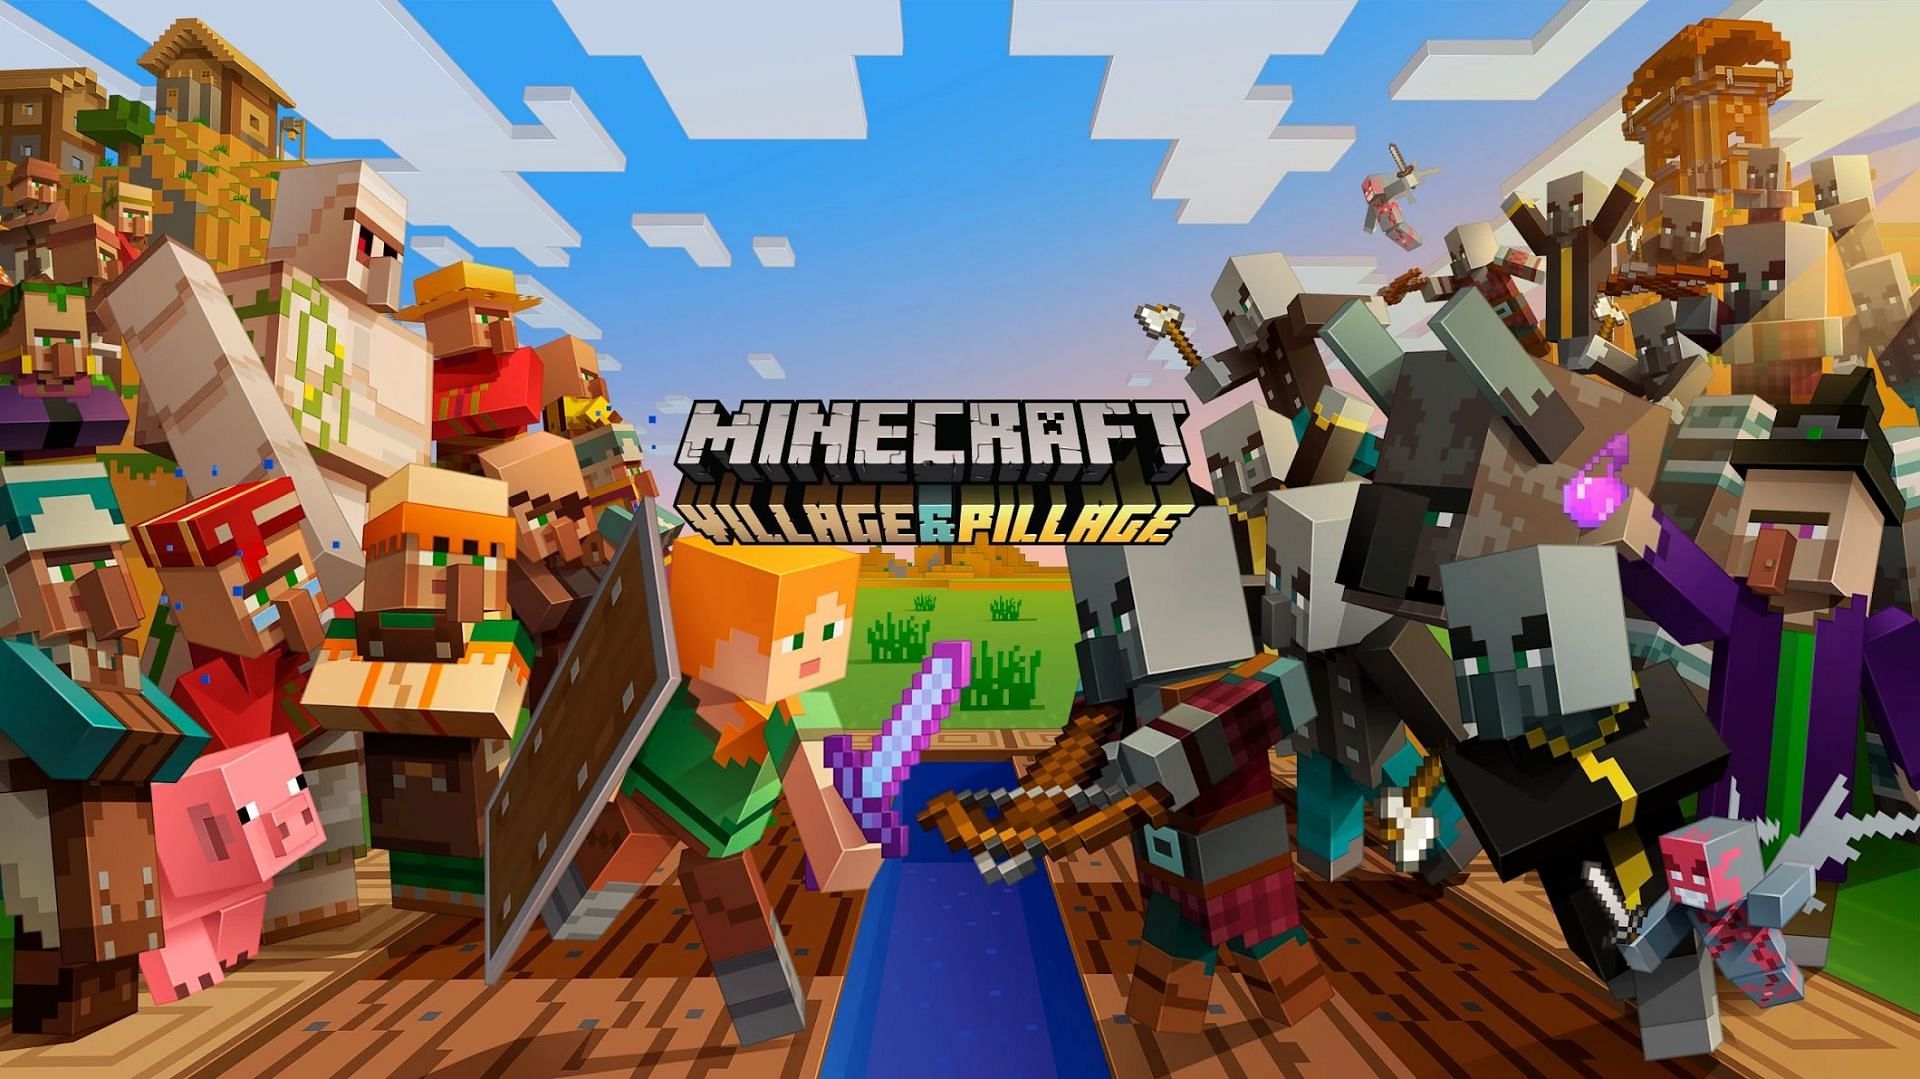 The official art for the Village and Pillage update (Image via Minecraft)